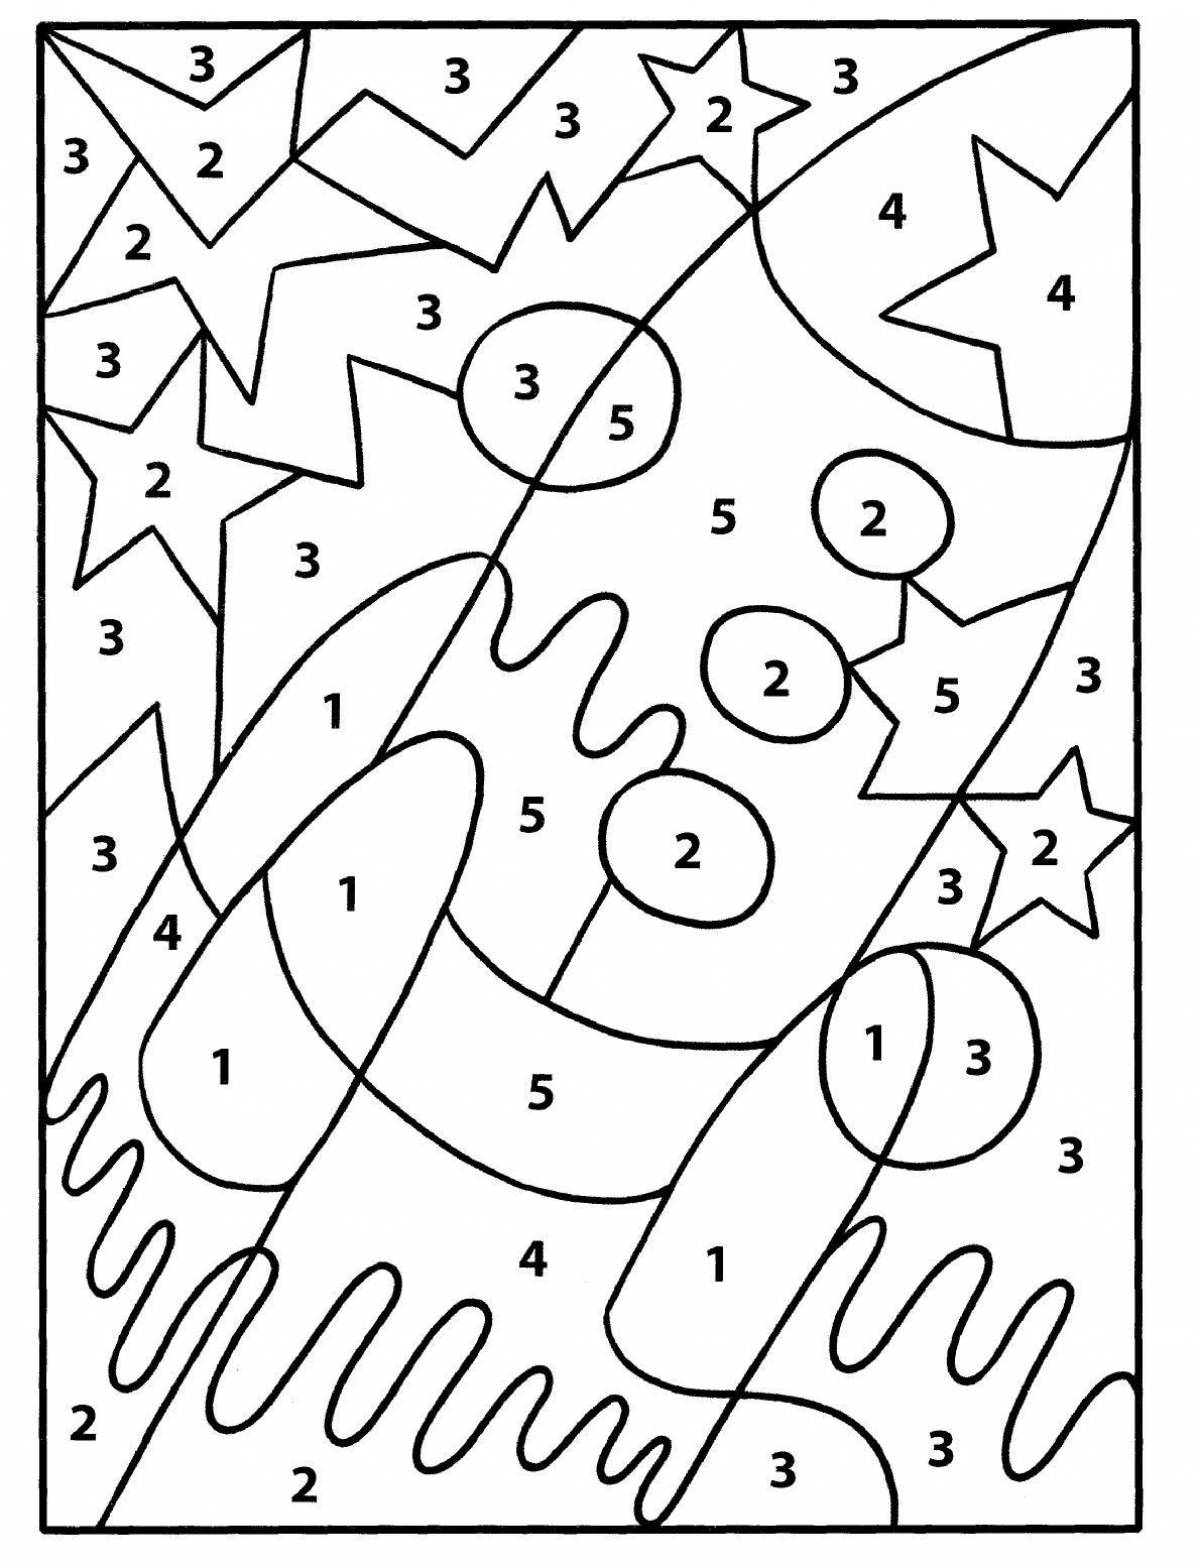 Joyful coloring by numbers up to 20